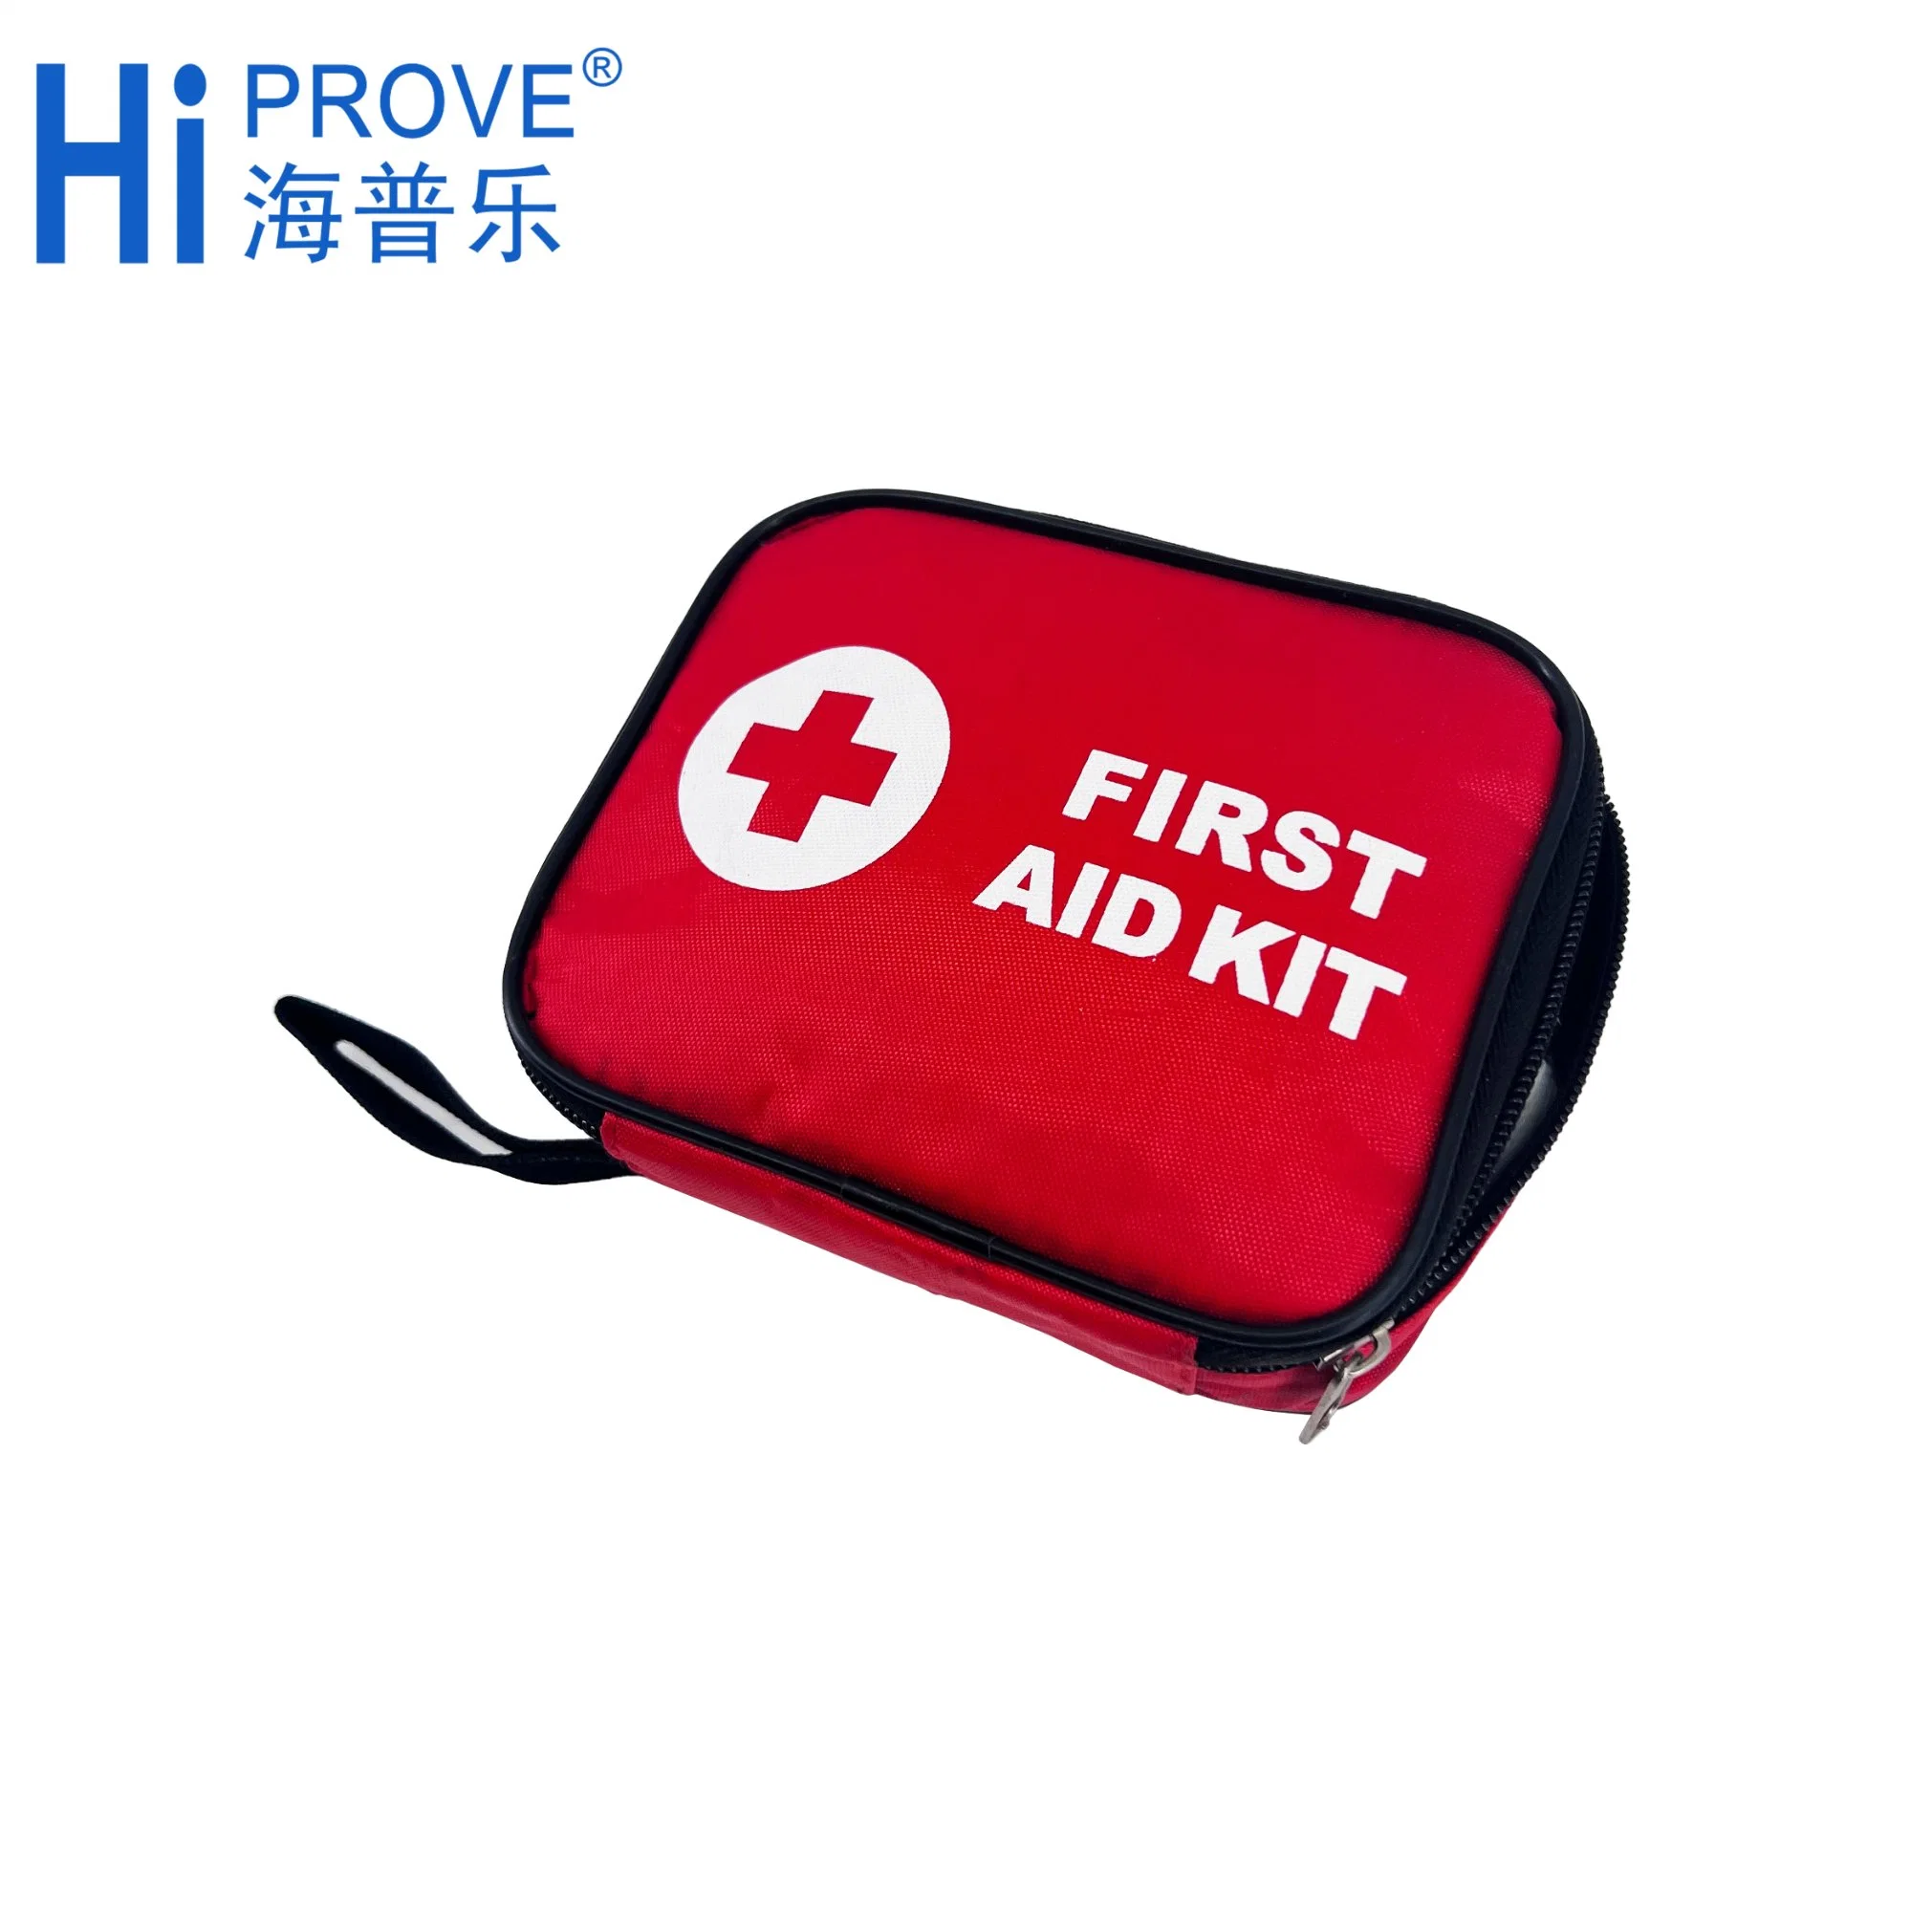 Home Use Waterproof Portable Empty Car Travel Auto Mini Sport First Aid Dressing Kit Bag Box for Family Travel Emergency Medical Treatment